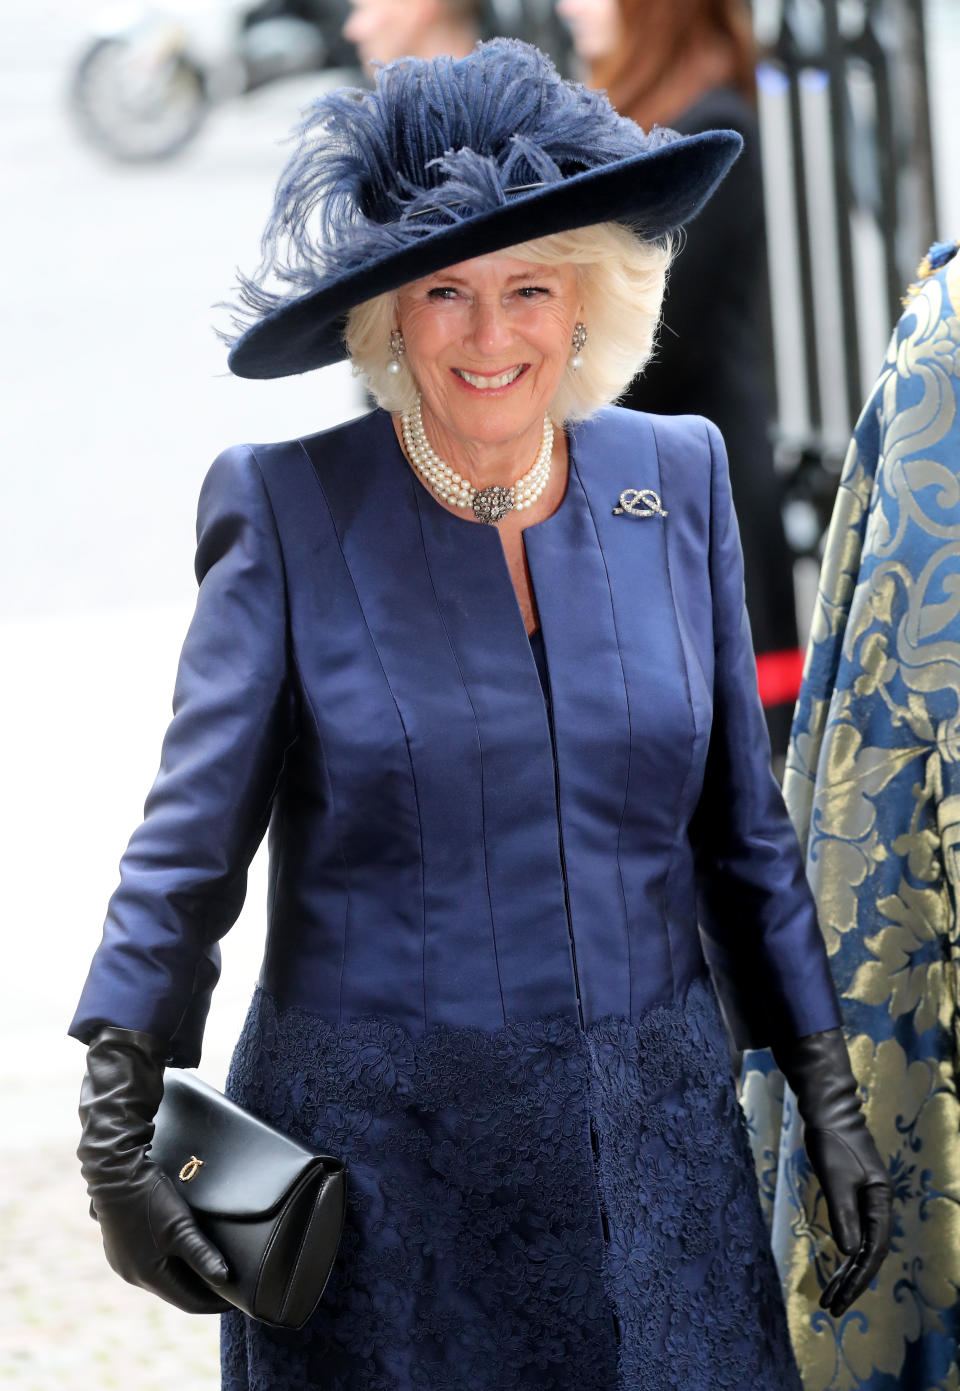 LONDON, ENGLAND - MARCH 09: Camilla, Duchess of Cornwall attends the Commonwealth Day Service 2020 at Westminster Abbey on March 09, 2020 in London, England. The Commonwealth represents 2.4 billion people and 54 countries, working in collaboration towards shared economic, environmental, social and democratic goals. (Photo by Chris Jackson/Getty Images)